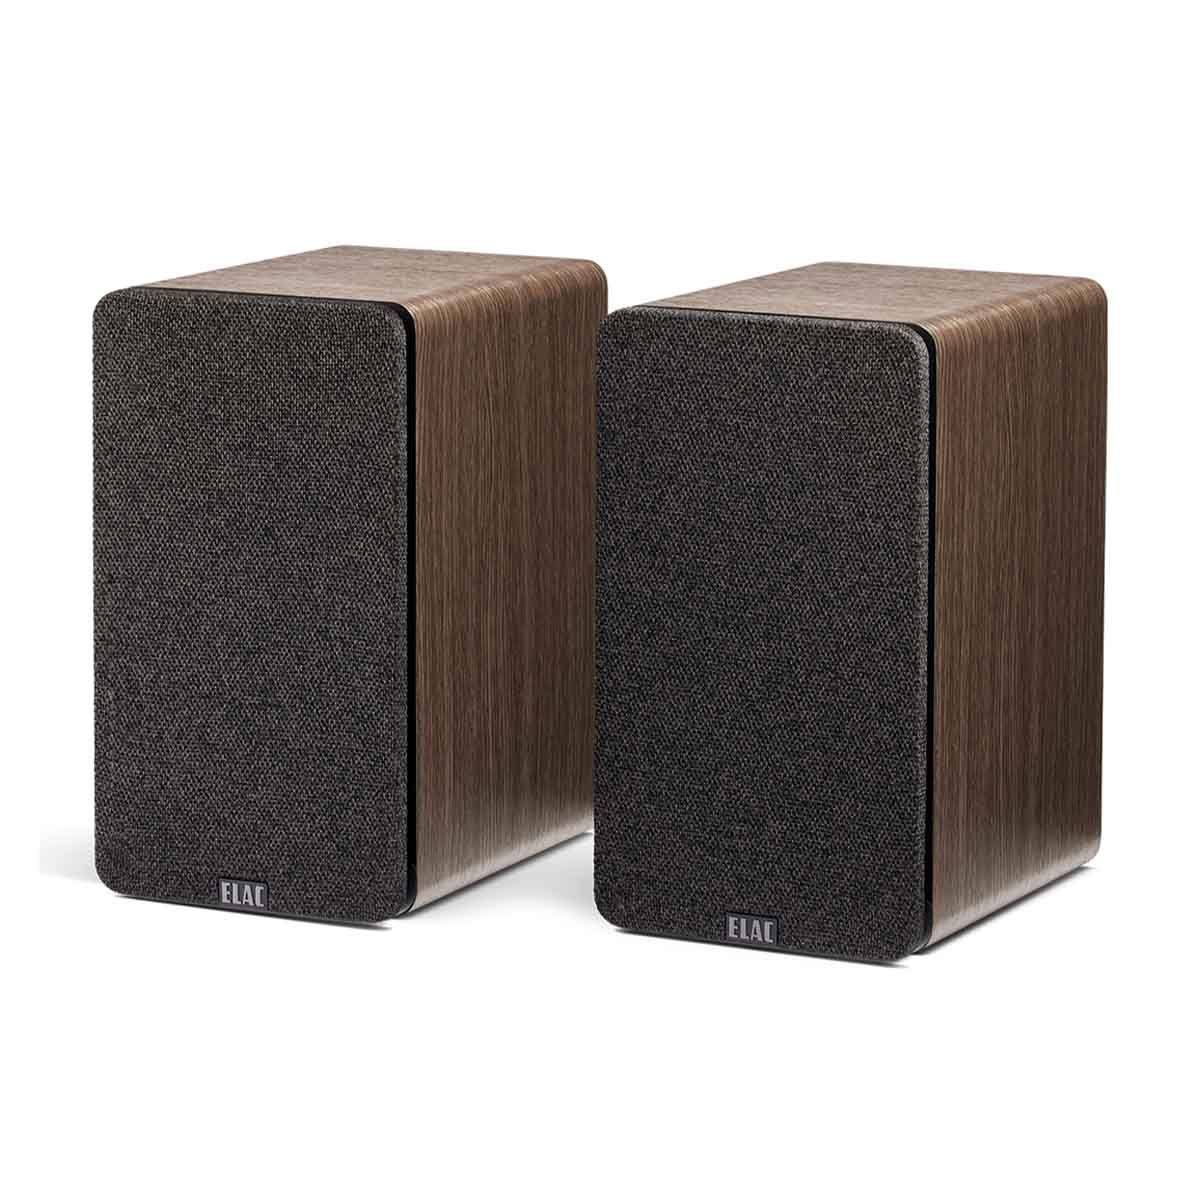 ELAC Debut ConneX DCB41 Powered Monitor Speakers - Walnut Pair with grille - angled front view